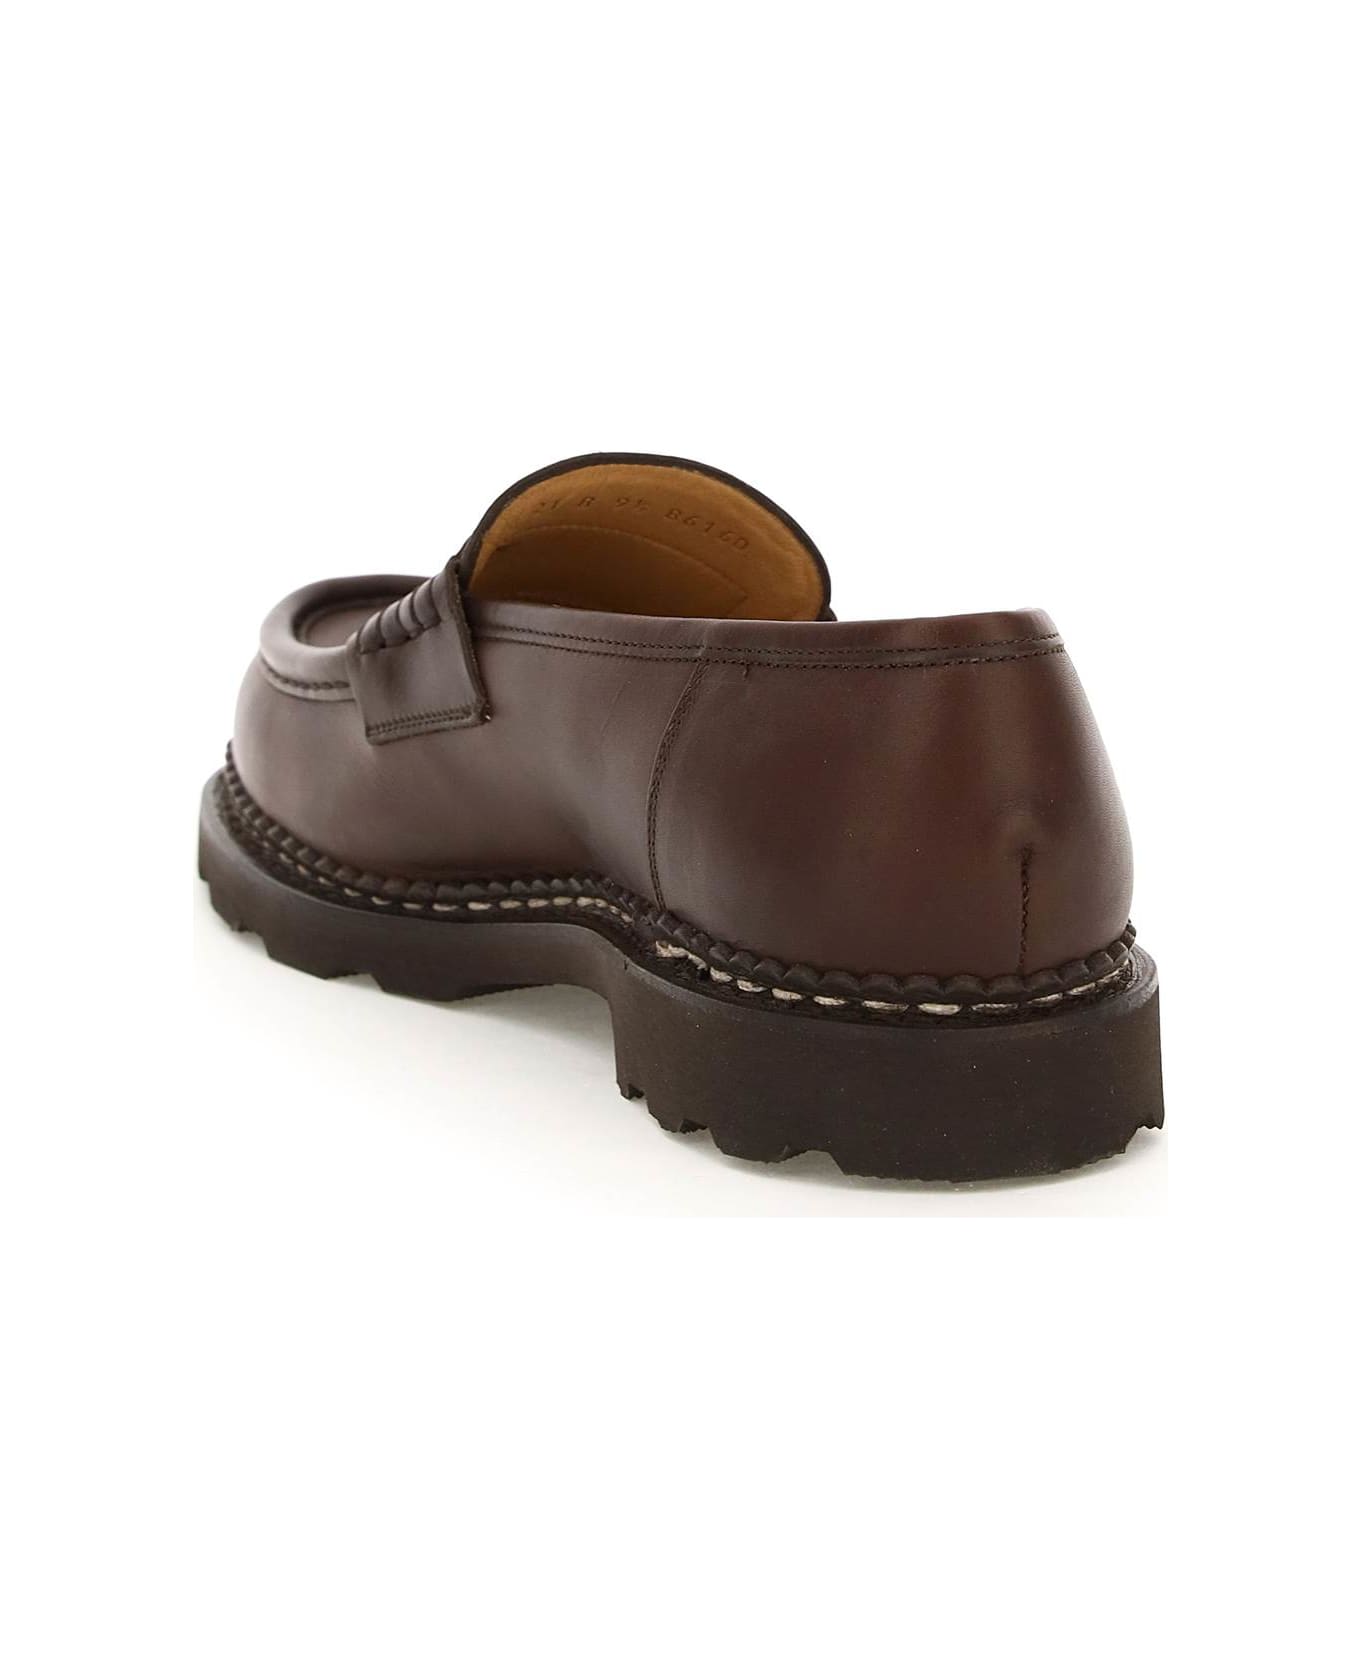 Paraboot Leather Reims Penny Loafers - Marron Lis Cafe`